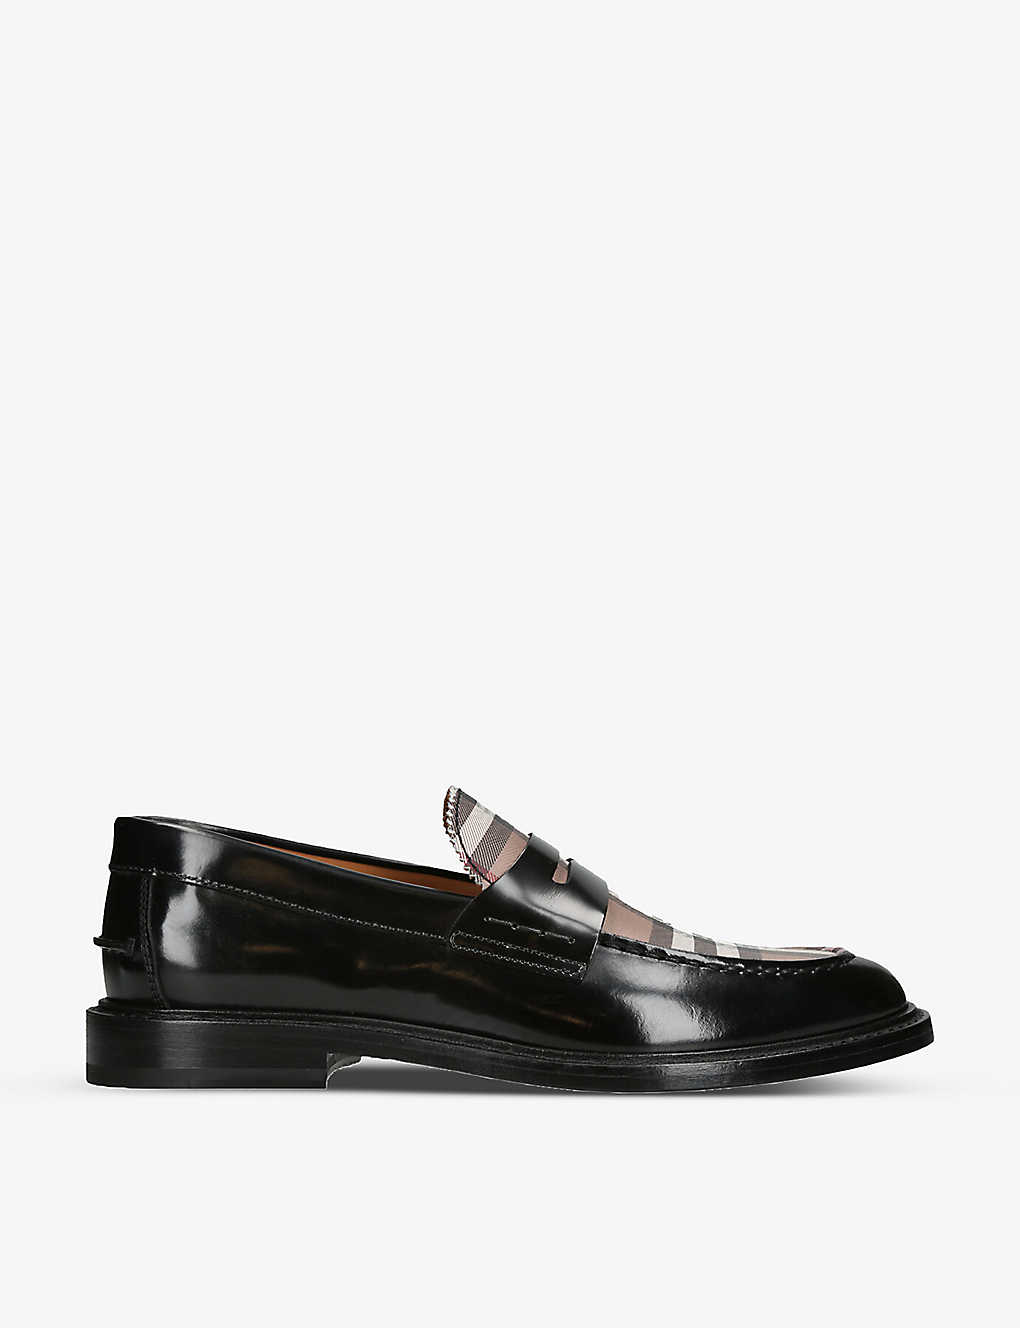 Shop Burberry Men's Blk/other Croftwood Check-pattern Leather Loafers